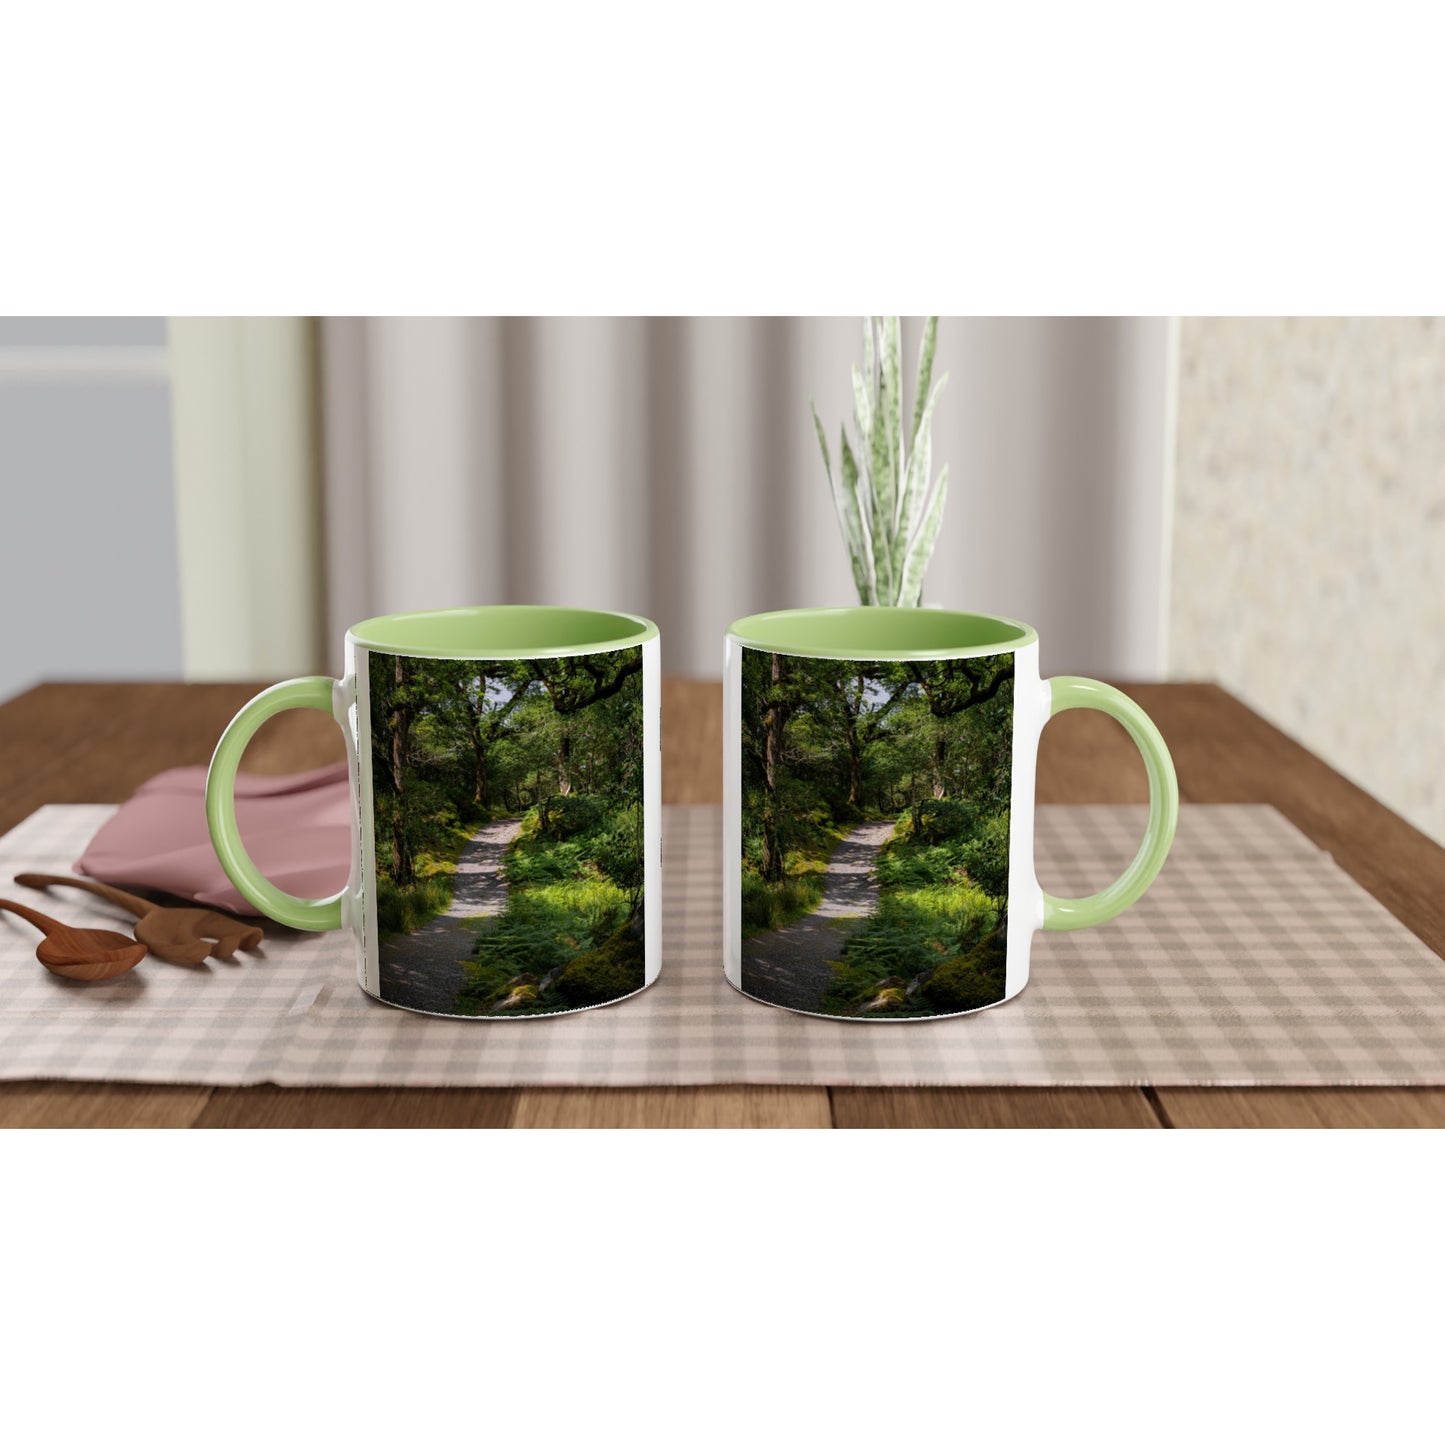 Forest path in the countryside ceramic mug - various colors